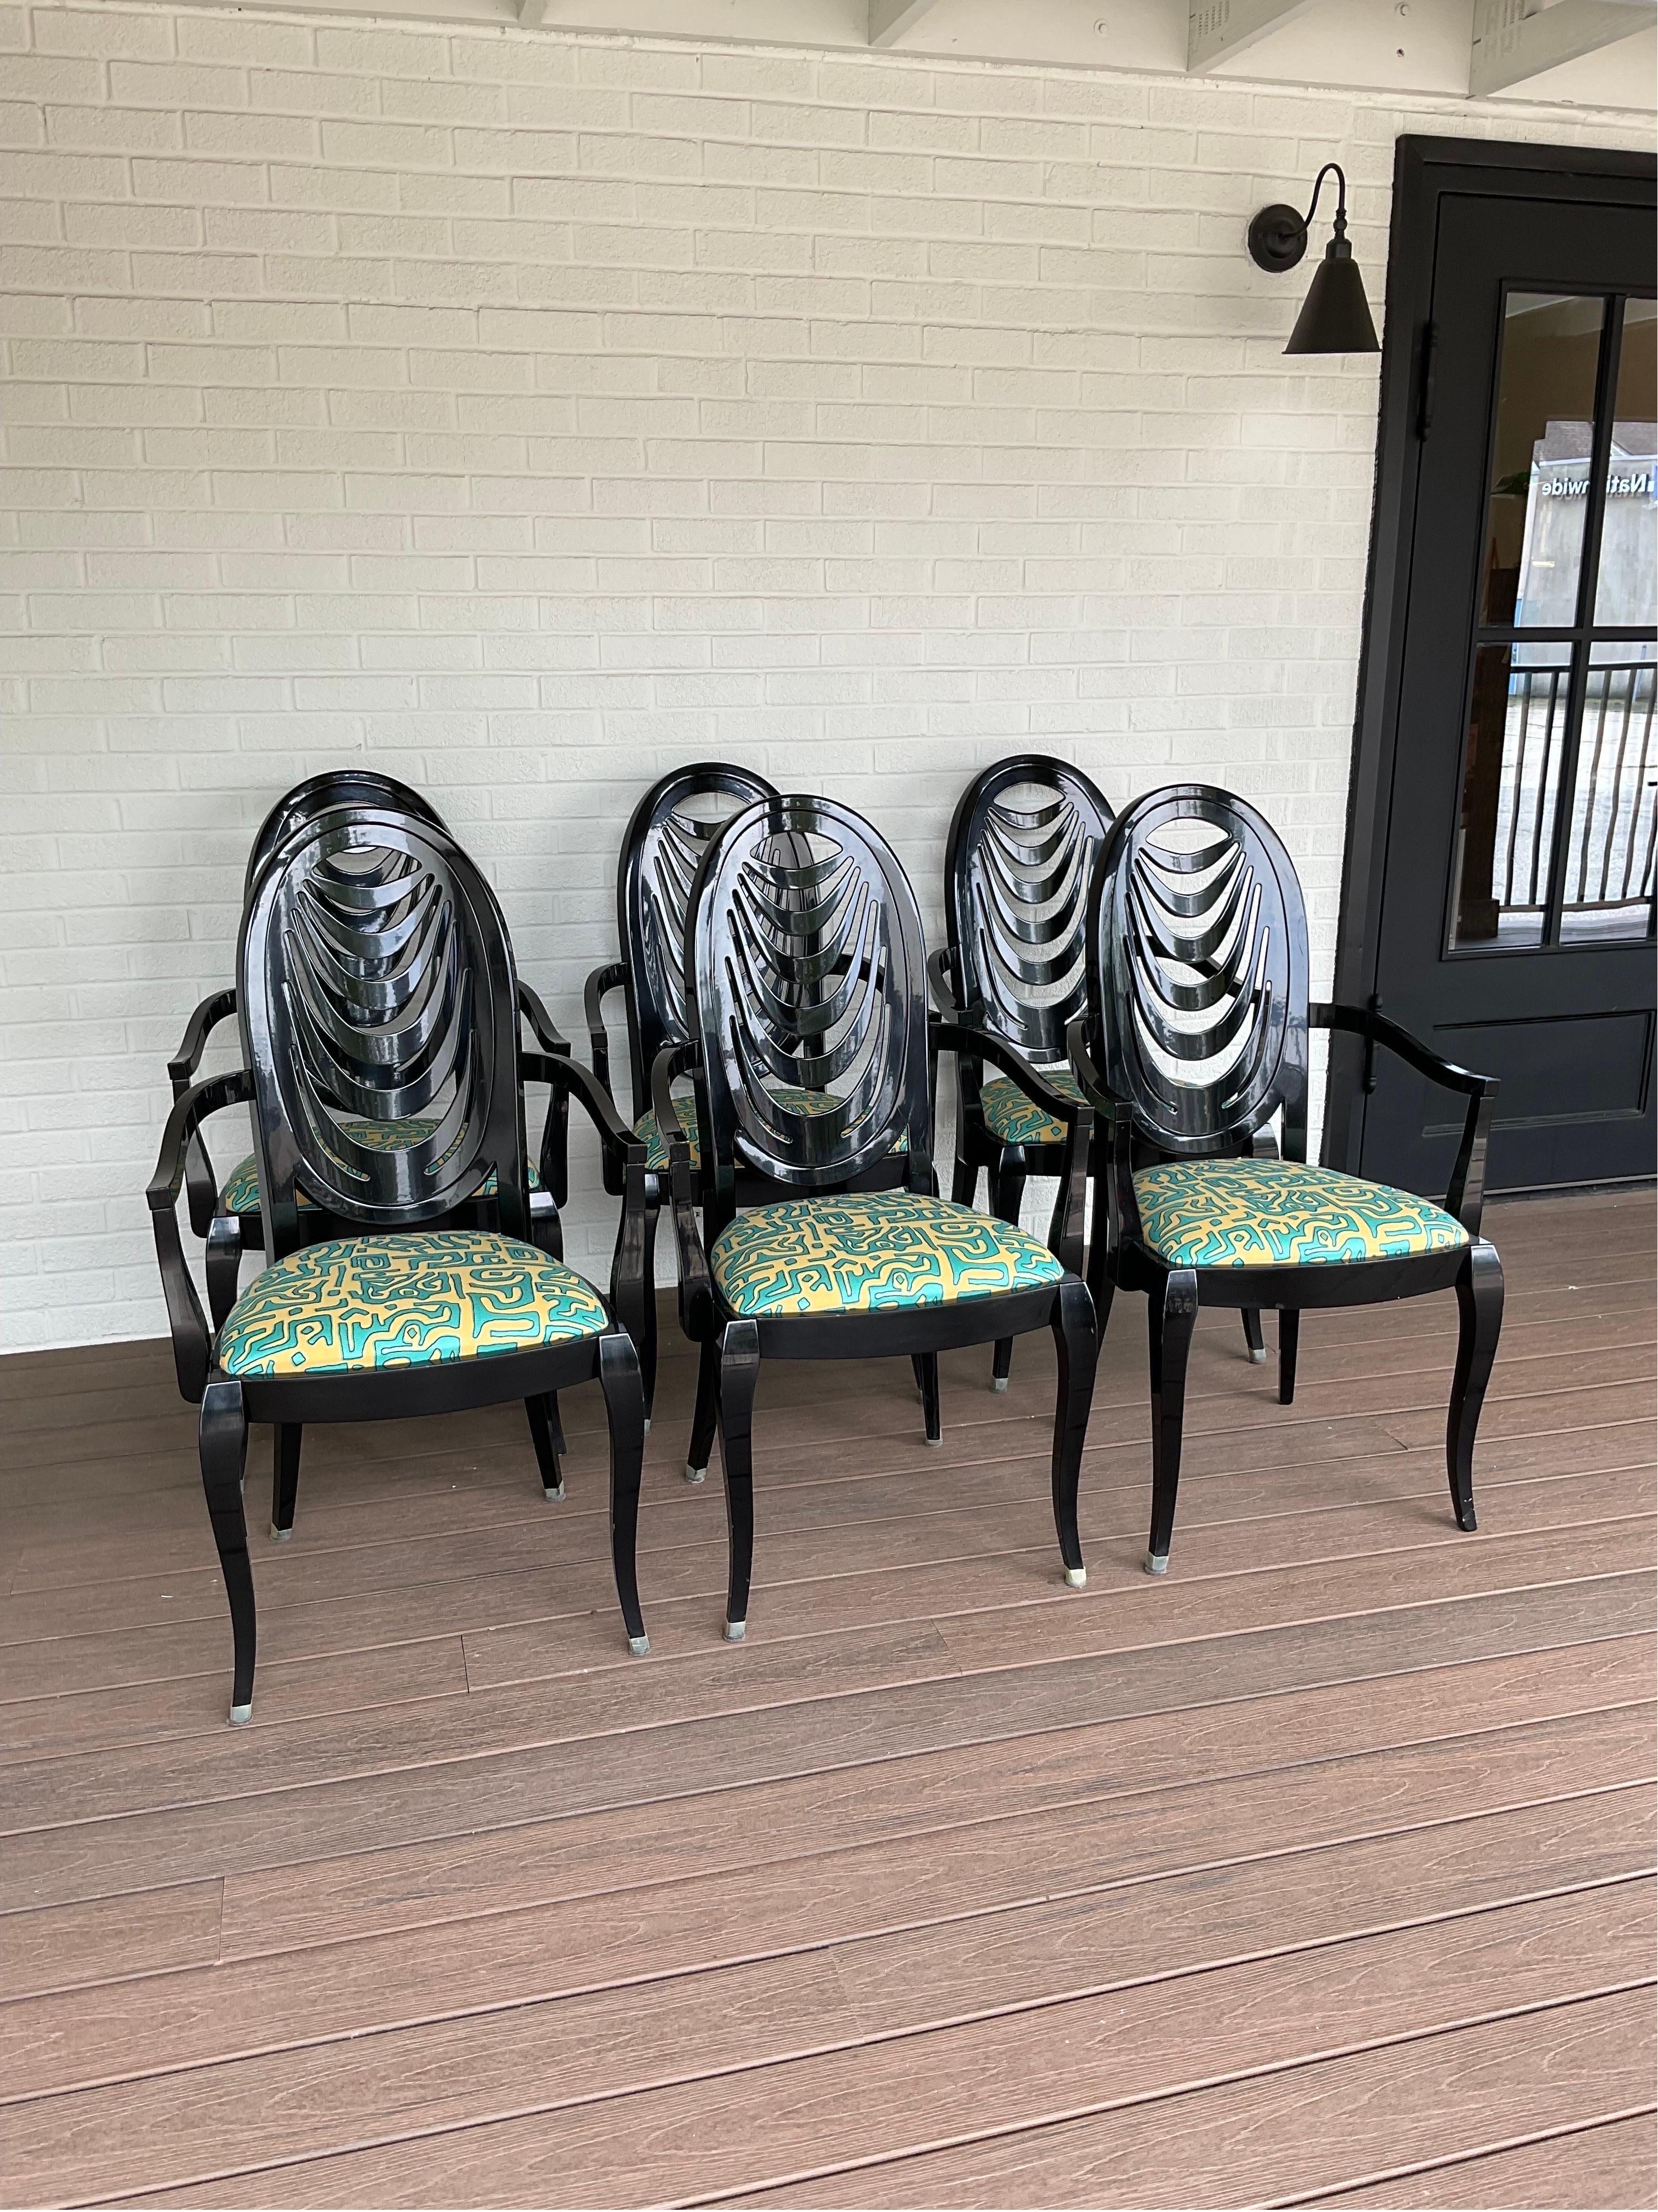 Striking set of 6 vintage black lacquered arm chairs from Italy designed by Pietro Constantini for Ello.
Freshly covered a masterfully woven Italian Kasai Cloth tapestry fabric from Robert Allen in Aquatic.
Seductive and finely draped and